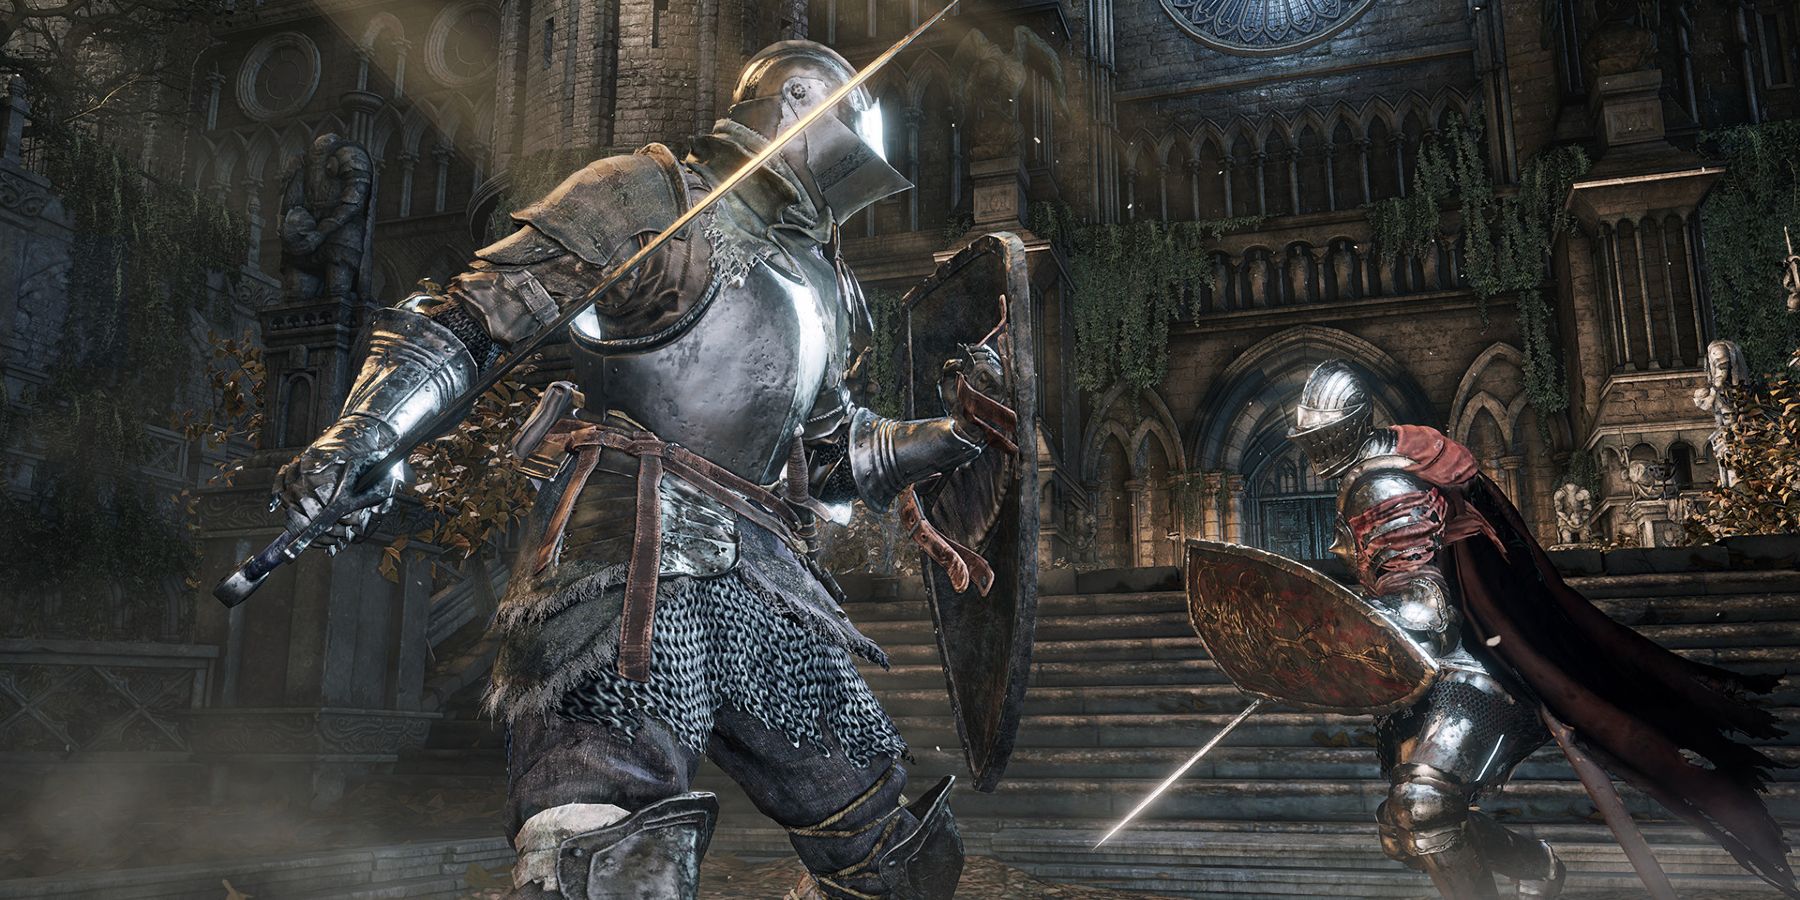 Which weapon is the best for PVE in Dark Souls 3 (I am currently using  Lothric Knight Straight Sword)? - Quora